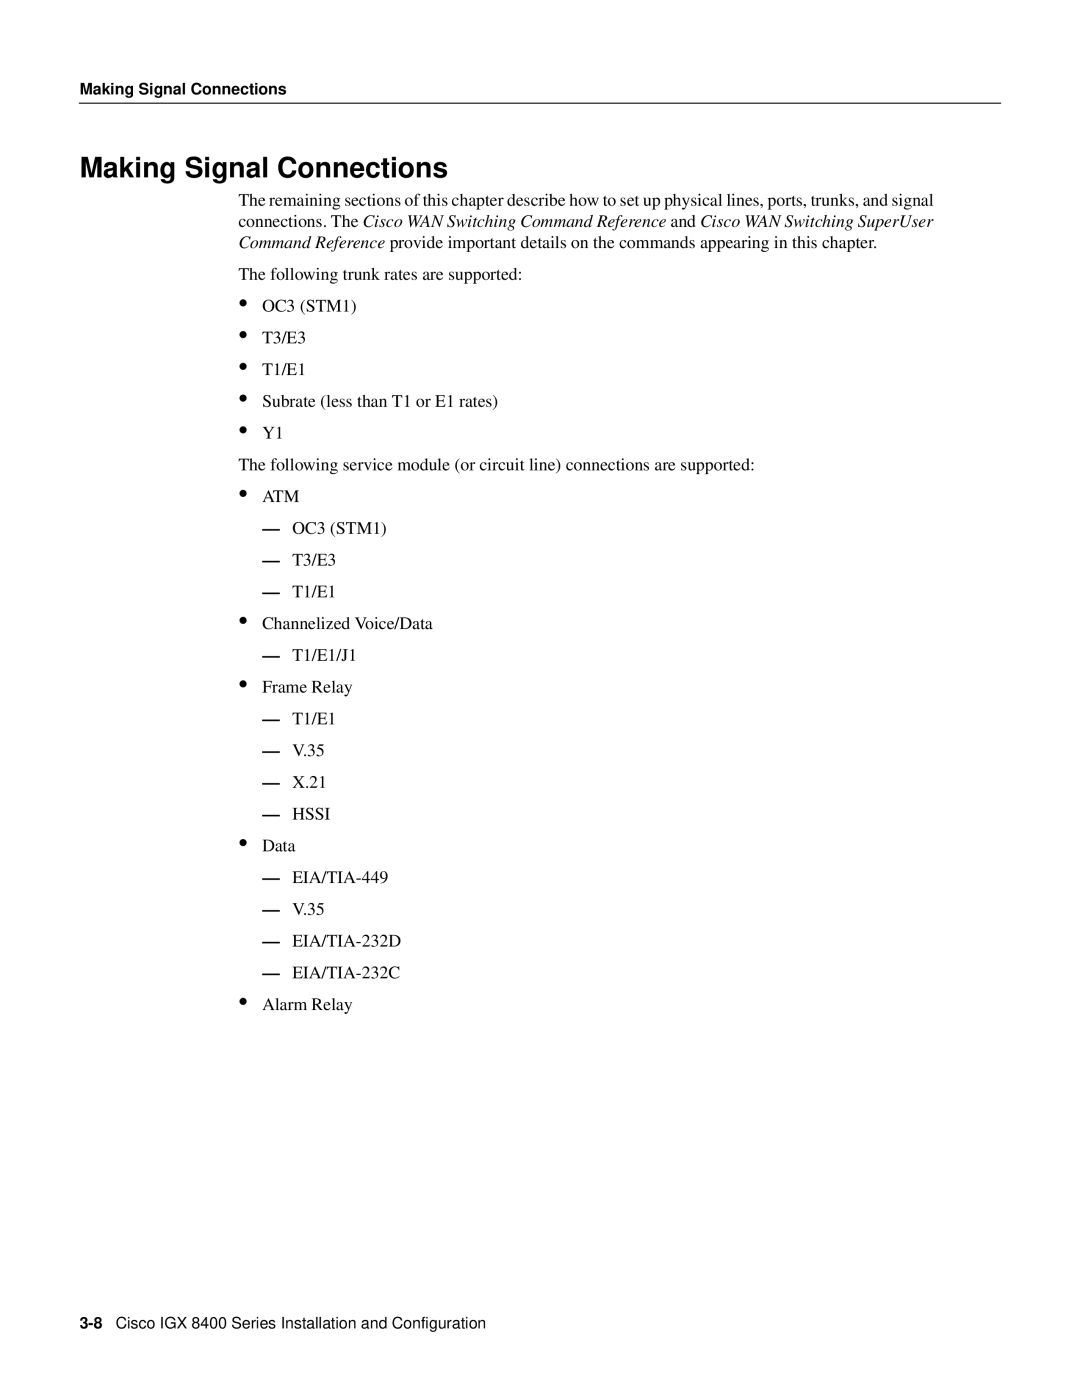 Cisco Systems IGX 8400 Series manual Making Signal Connections 